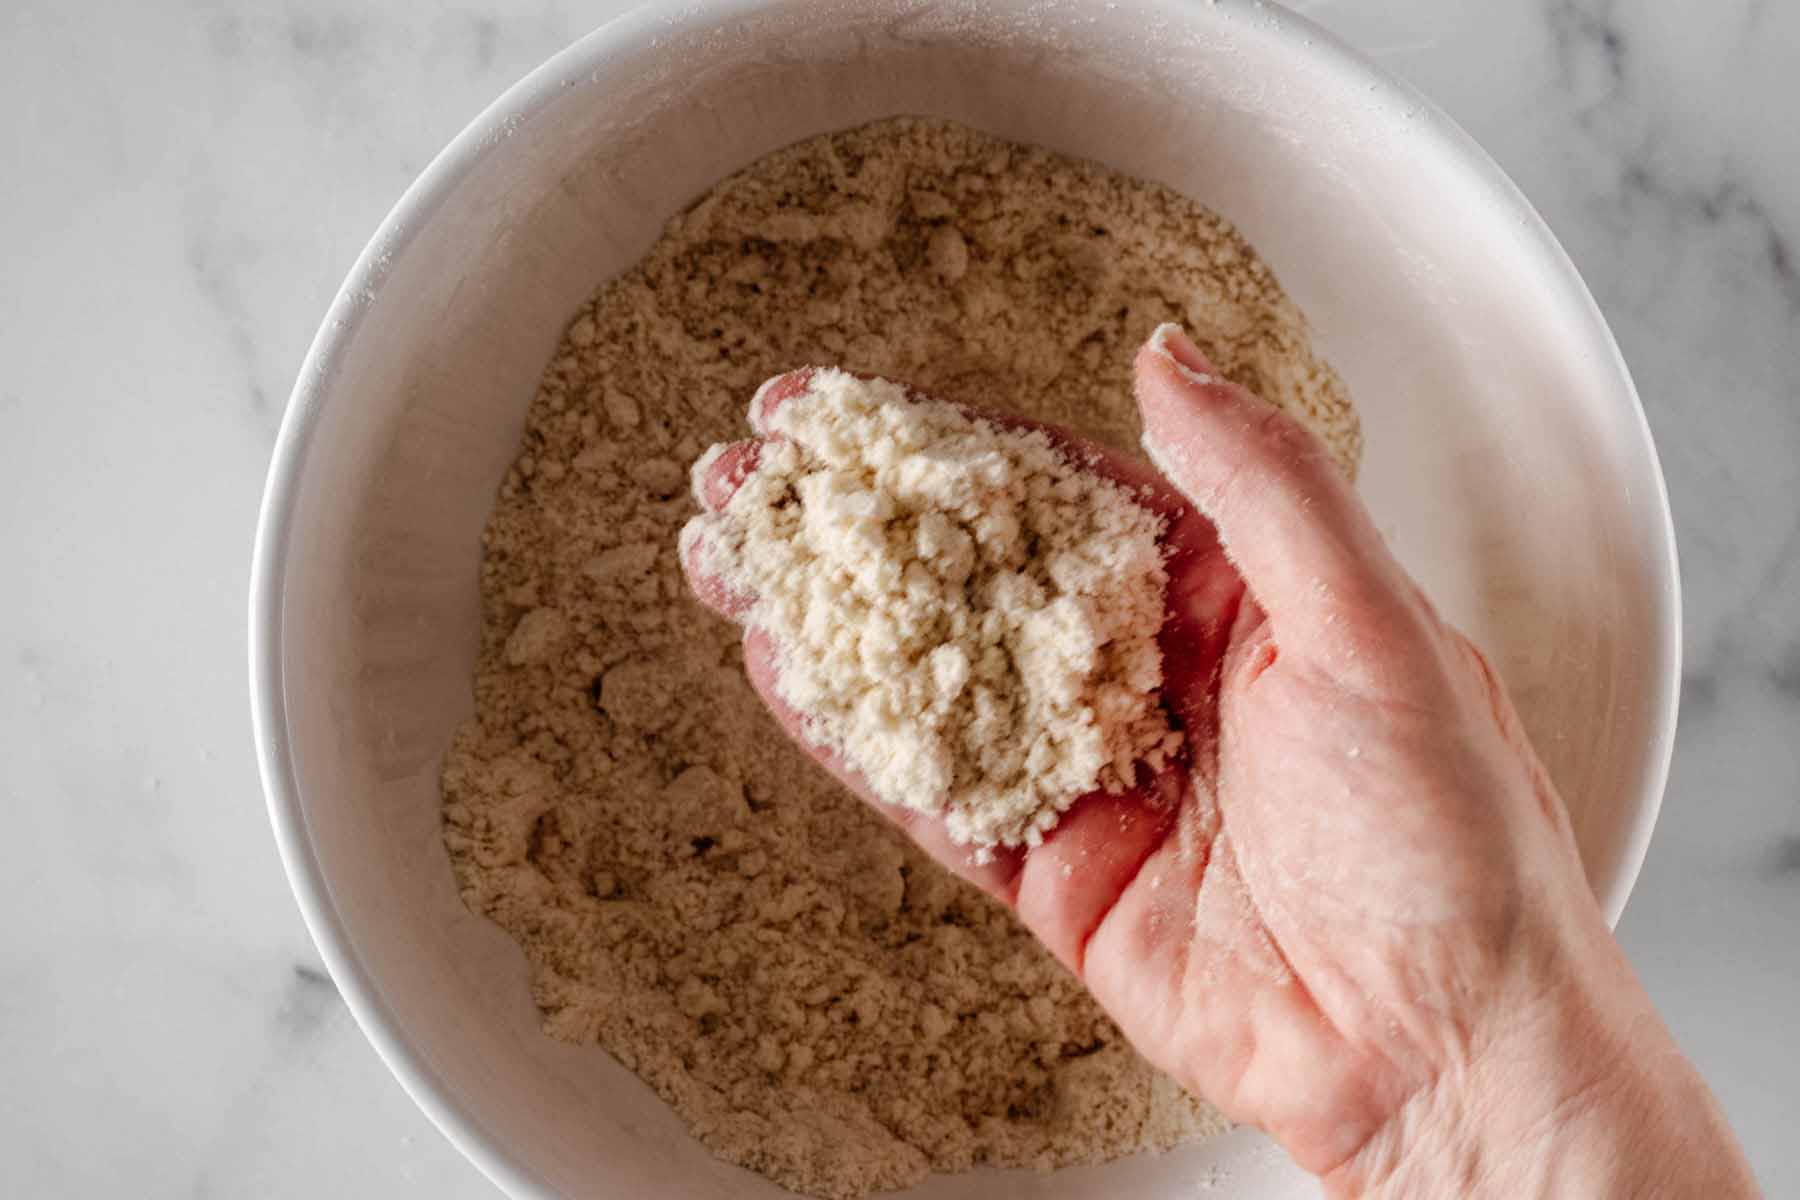 A hand holding a handful of flour and butter mixture to demonstrate the texture of the mixture.